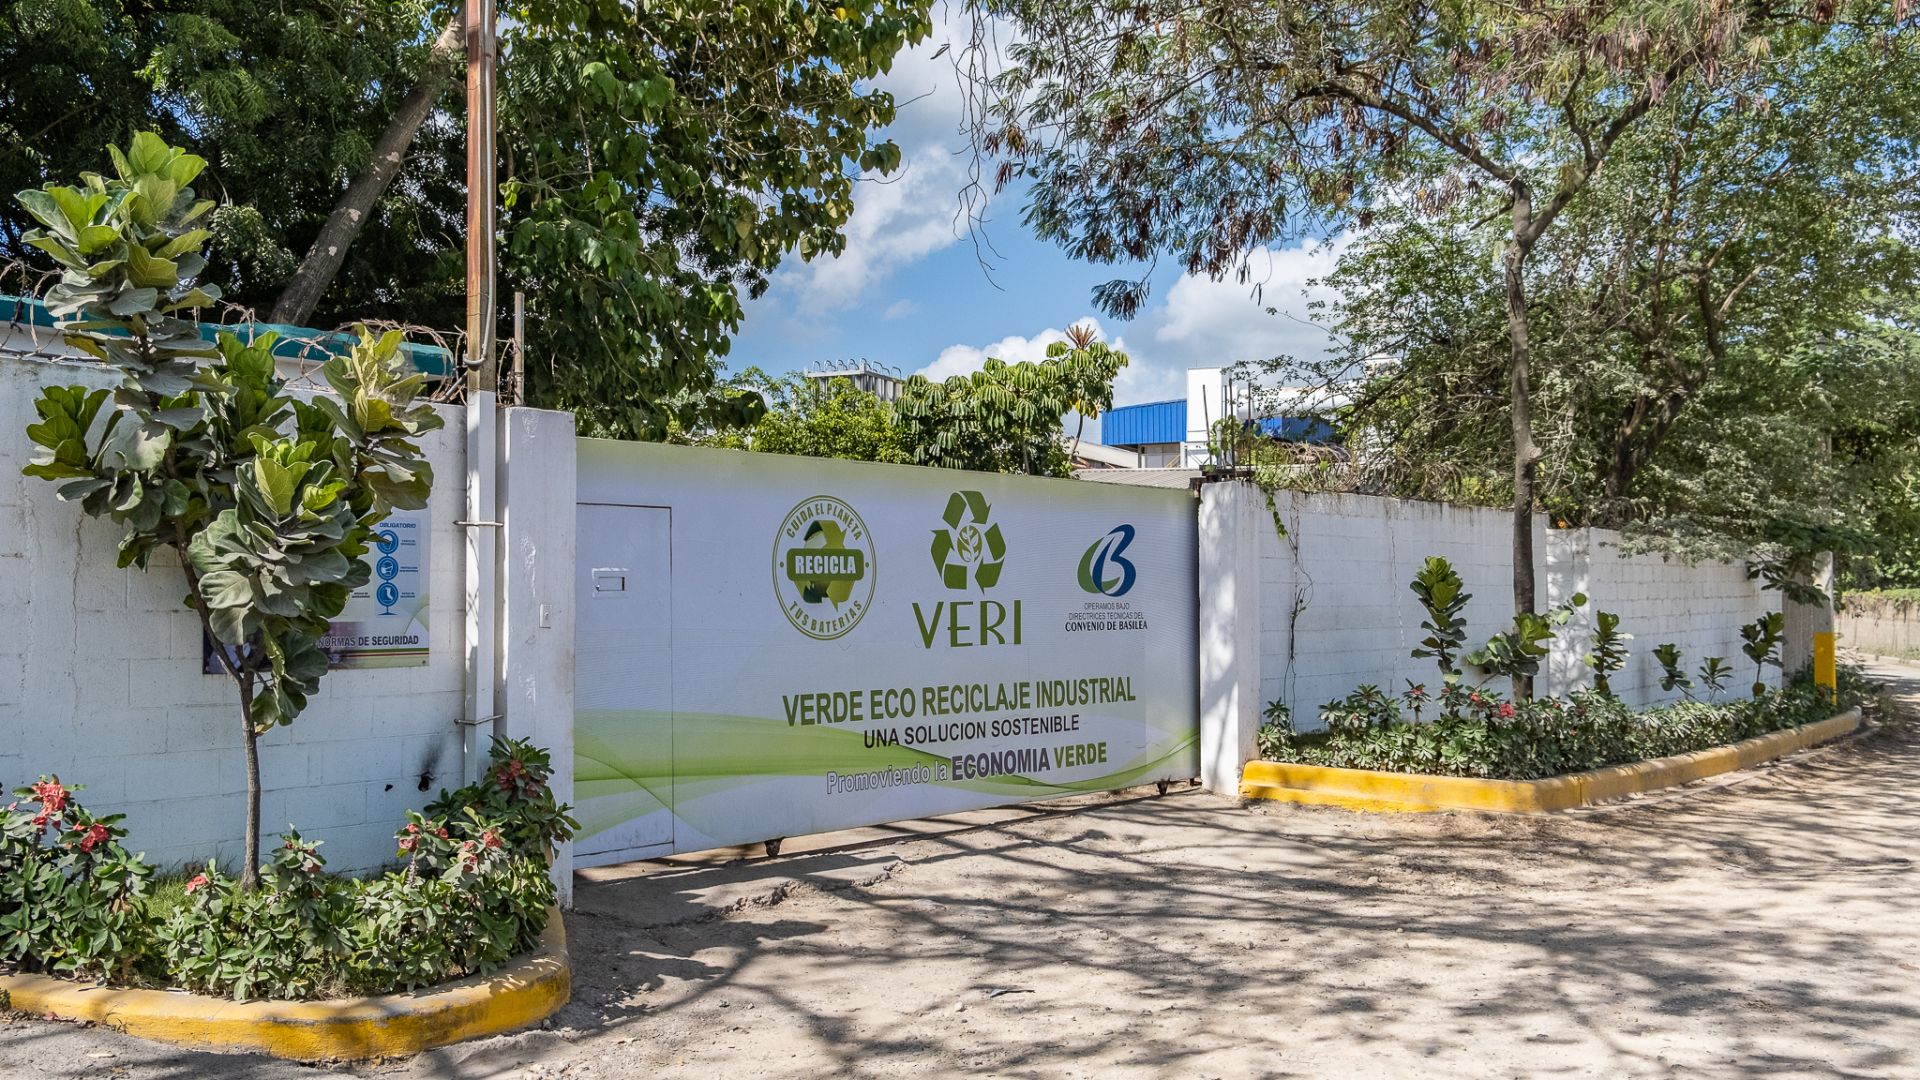 The entrance of the VERI factory